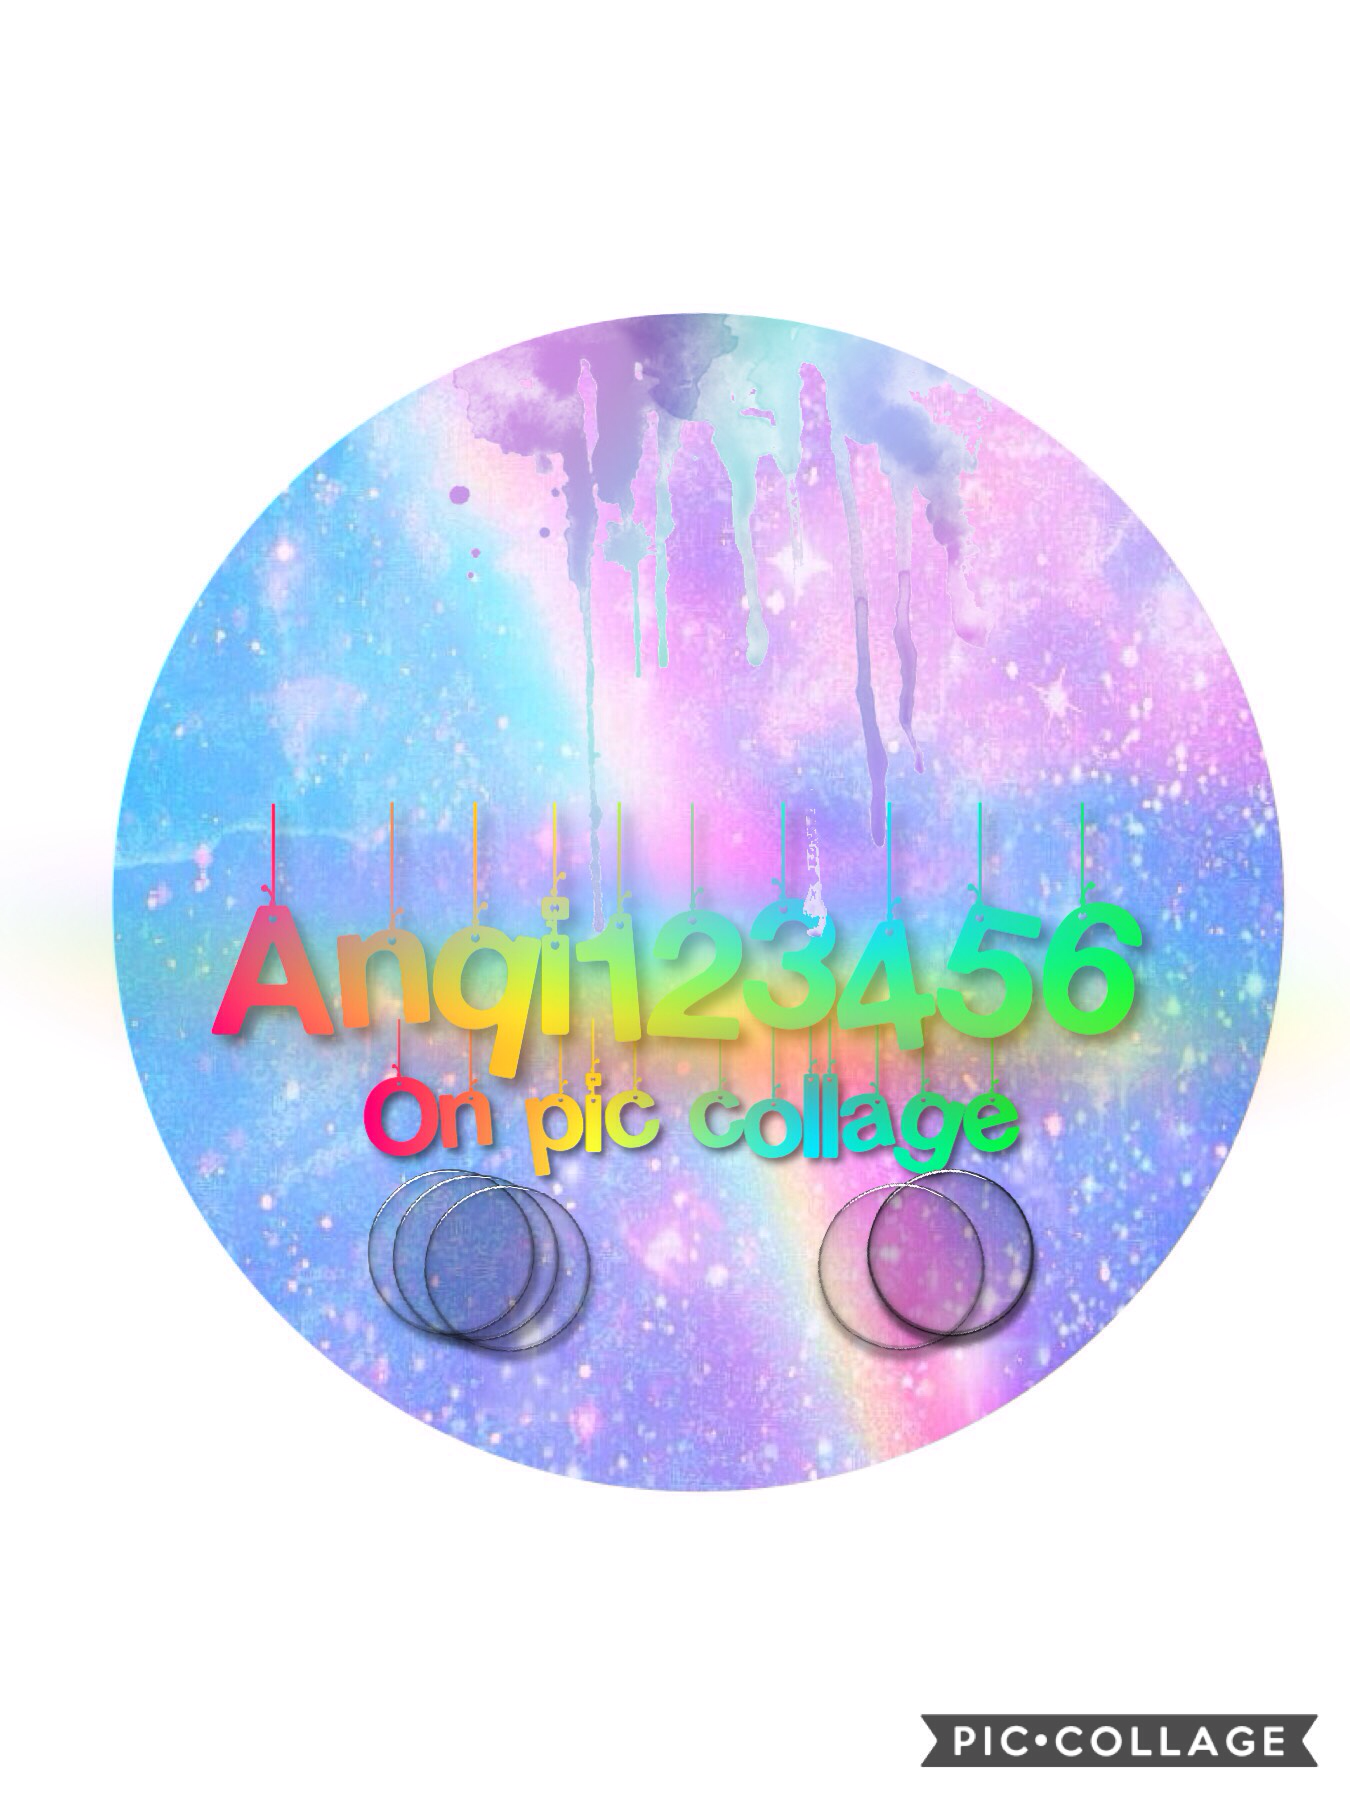 Icon for Anqi123456!! Hope you like it!